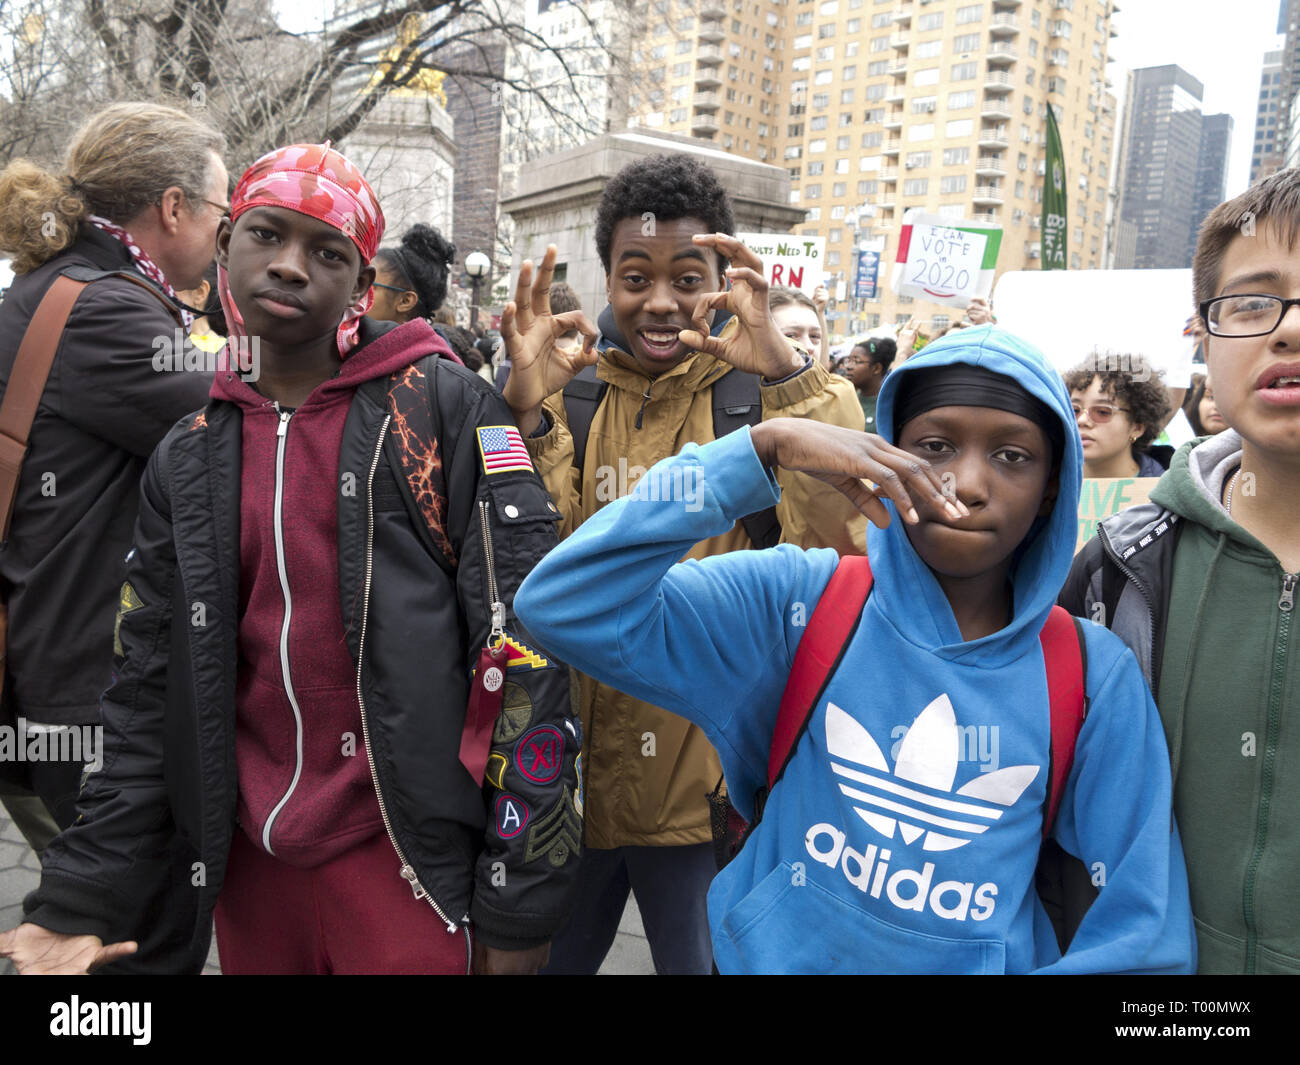 Student Strike for Climate Change at Columbus Circle in NYC, March 15, 2019. Teens mug for the camera. Stock Photo